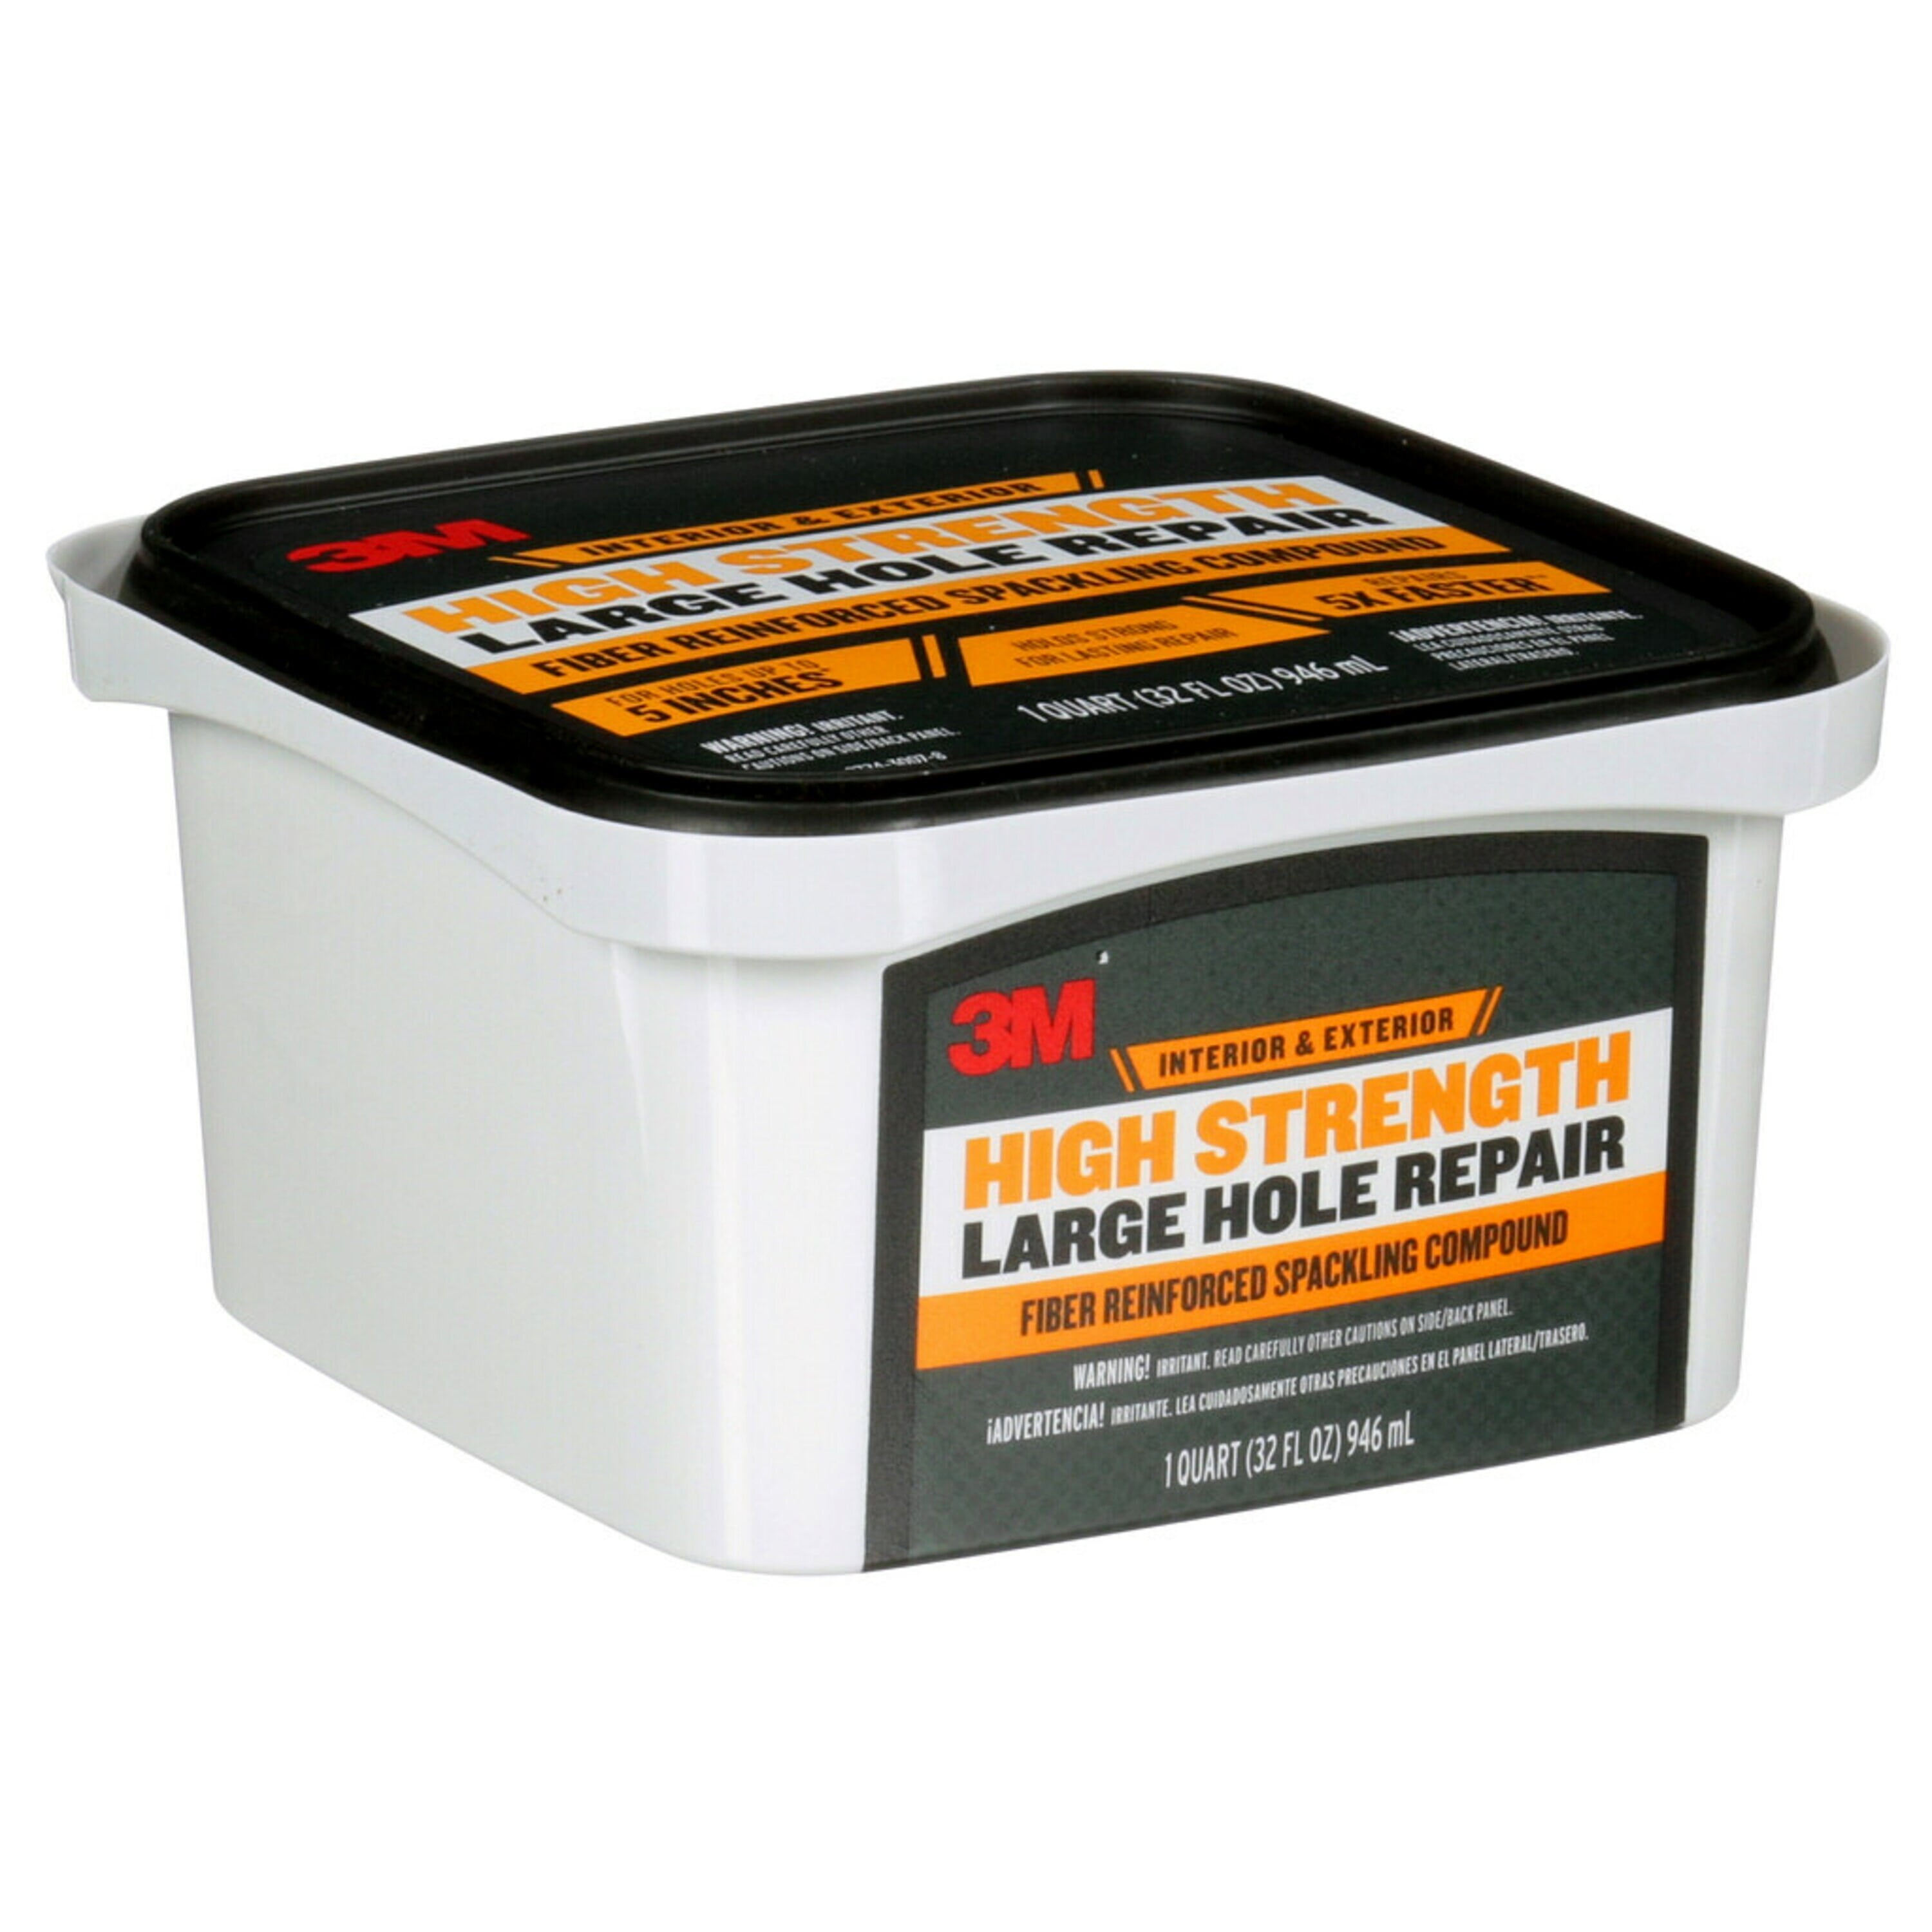 Interior Large 32 Reinforced, Hole Filler, Strength High White, oz. Wall Exterior and 3M Fiber Use,